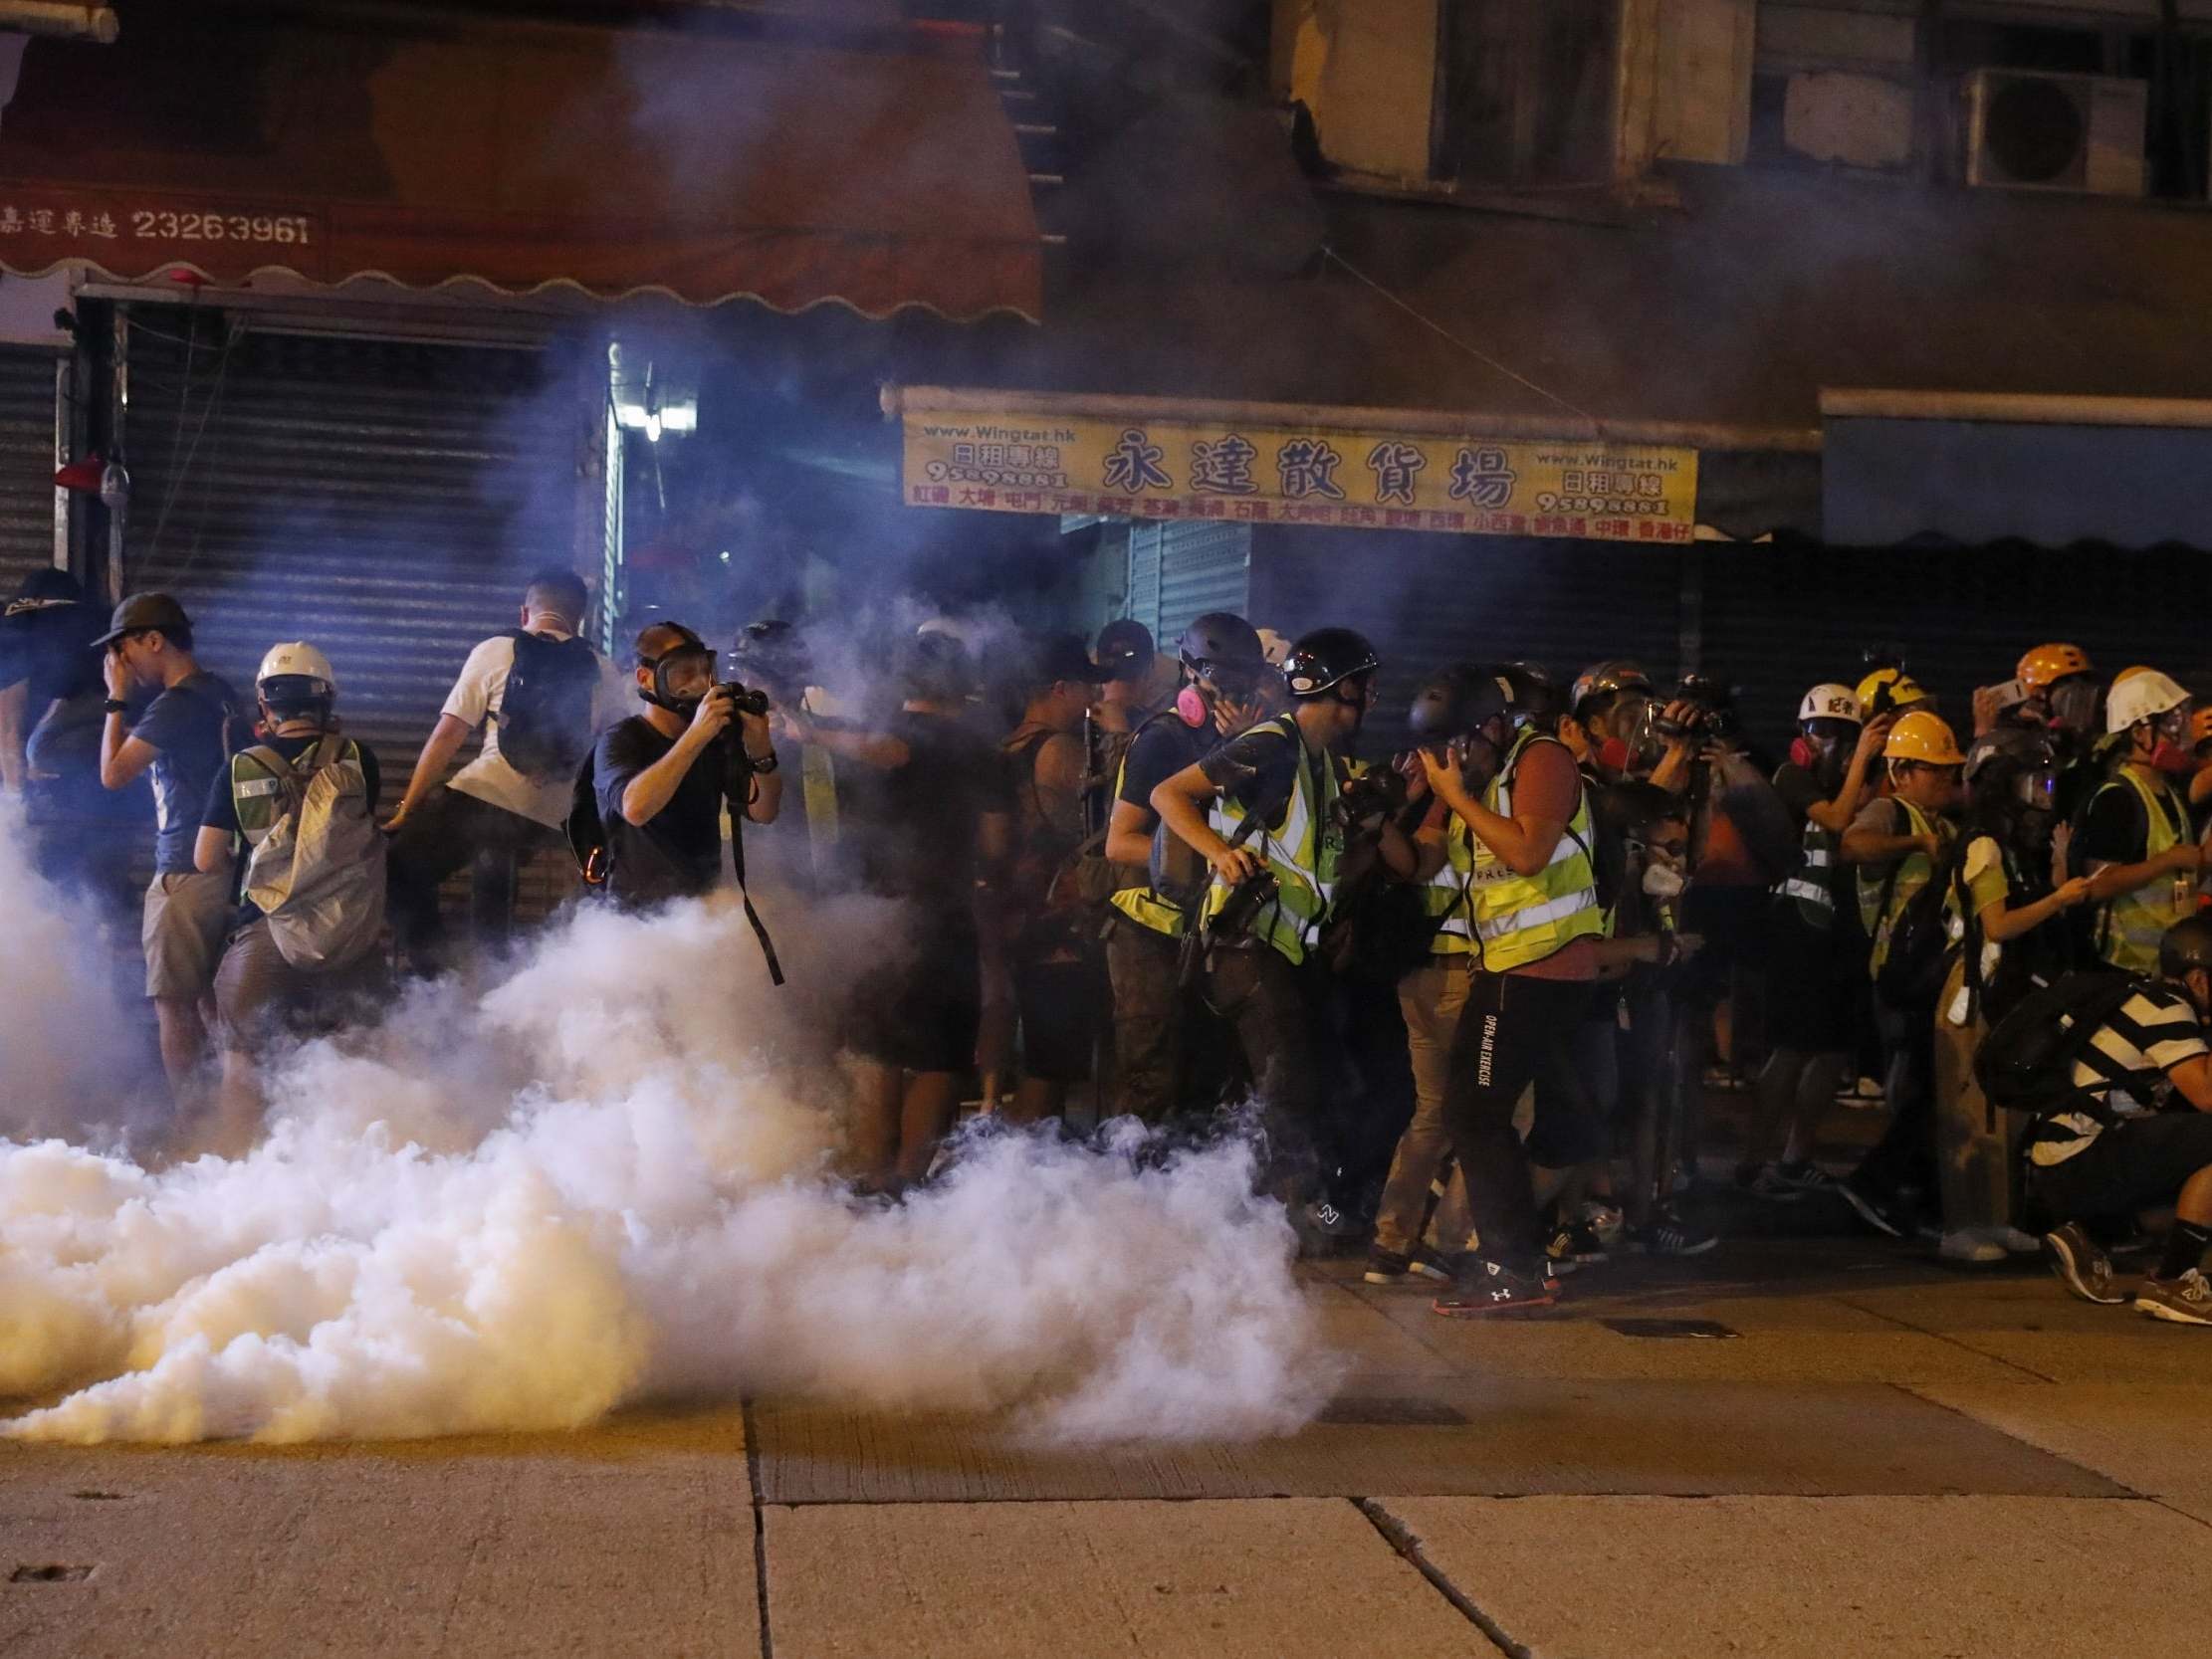 Hong Kong protests: Police fire tear gas and rubber bullets at crowds as violence breaks out